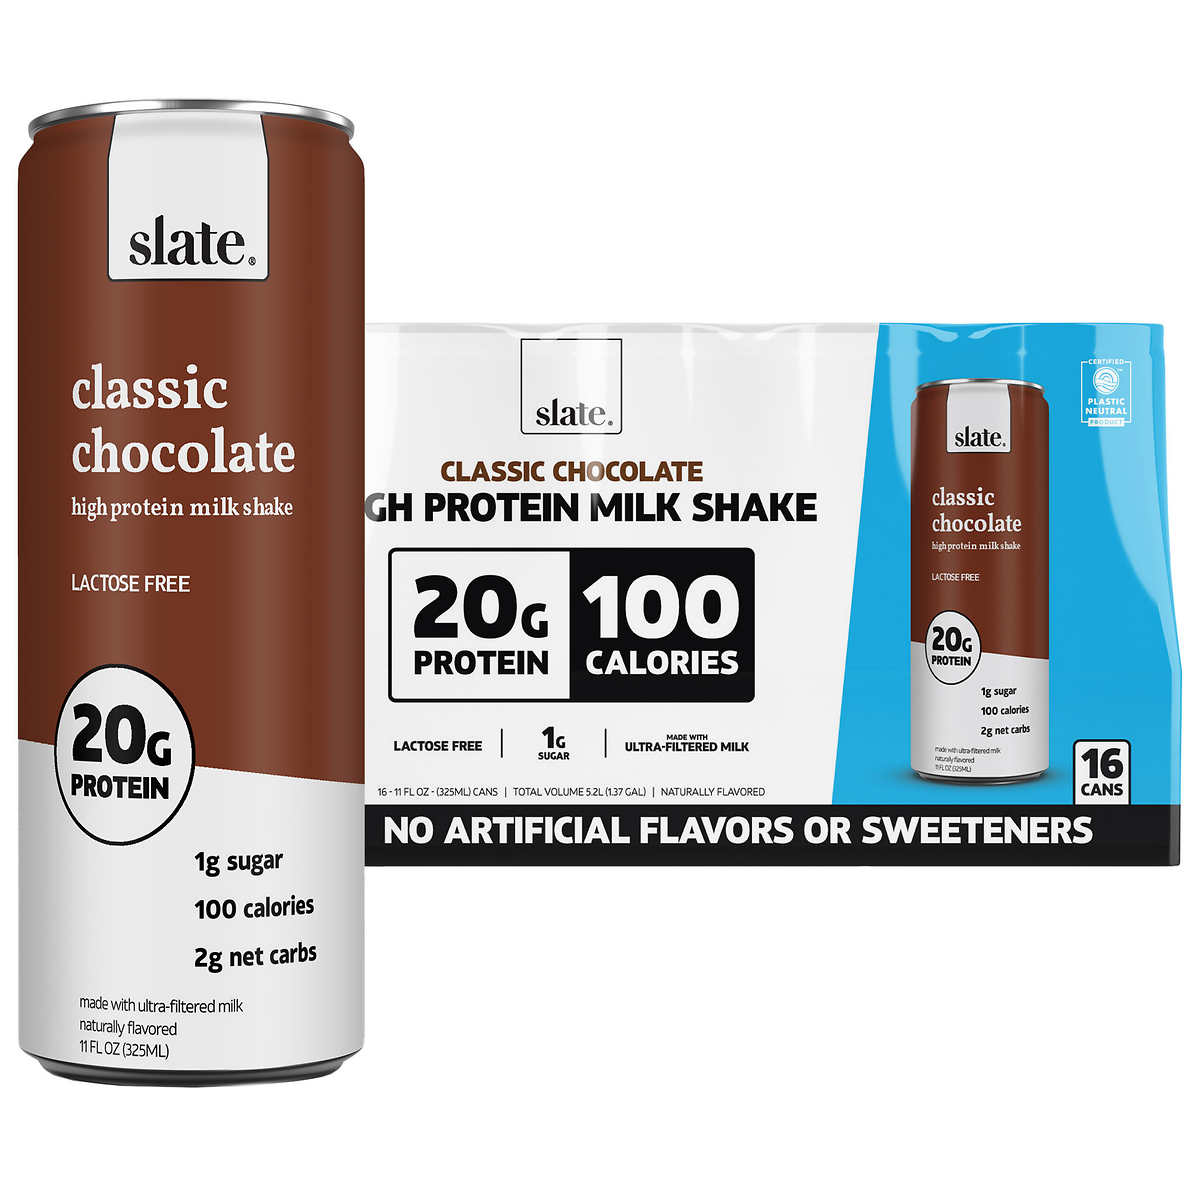 Slate Milk - High Protein Shake, French Vanilla Milk, 20g Protein, 0g Added  Sugar, Lactose Free, Keto, All Natural (11 oz, 12-Pack) 